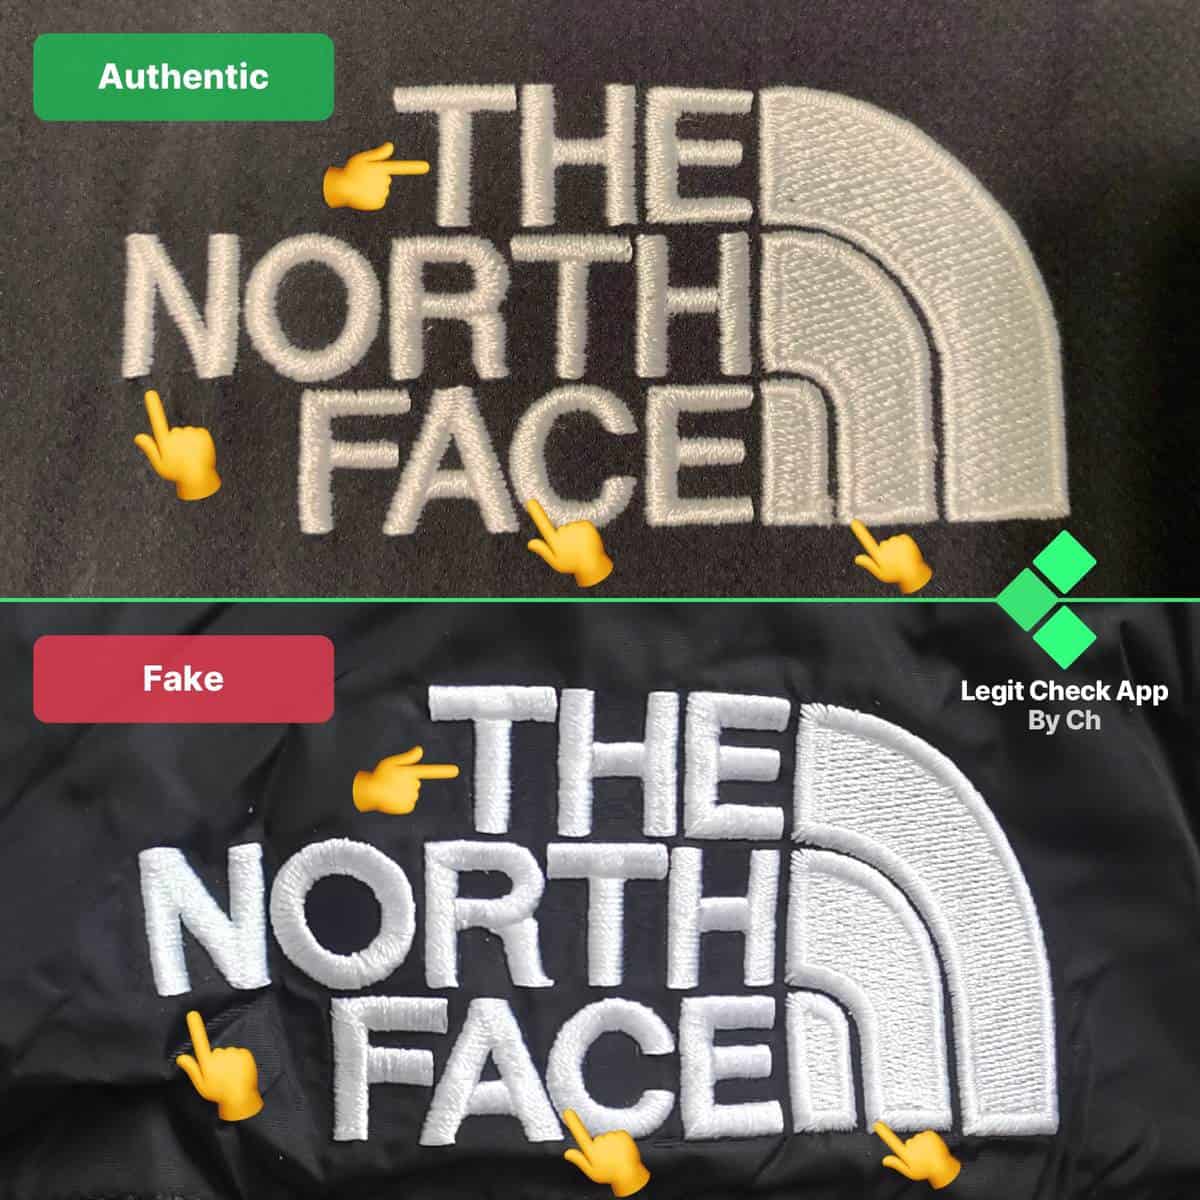 north face jacket with logo on arm